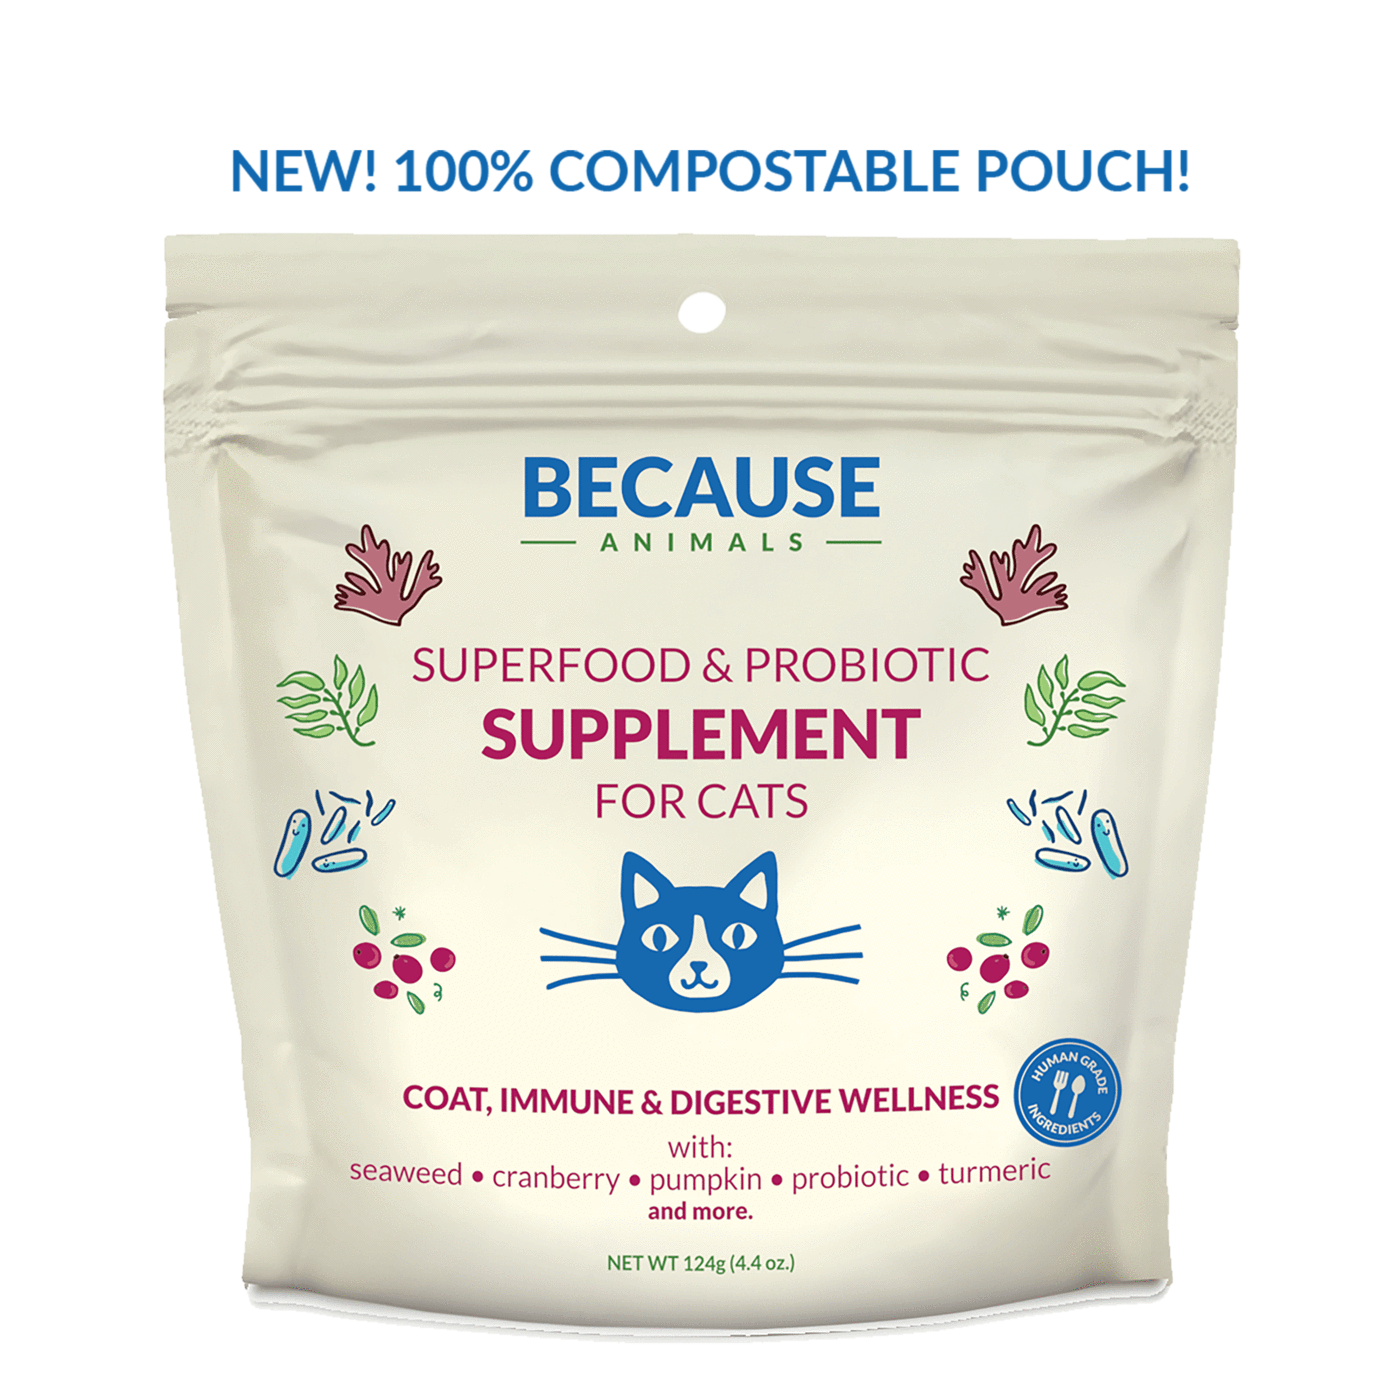 Because Animals Superfood & Probiotic Supplement for Cats